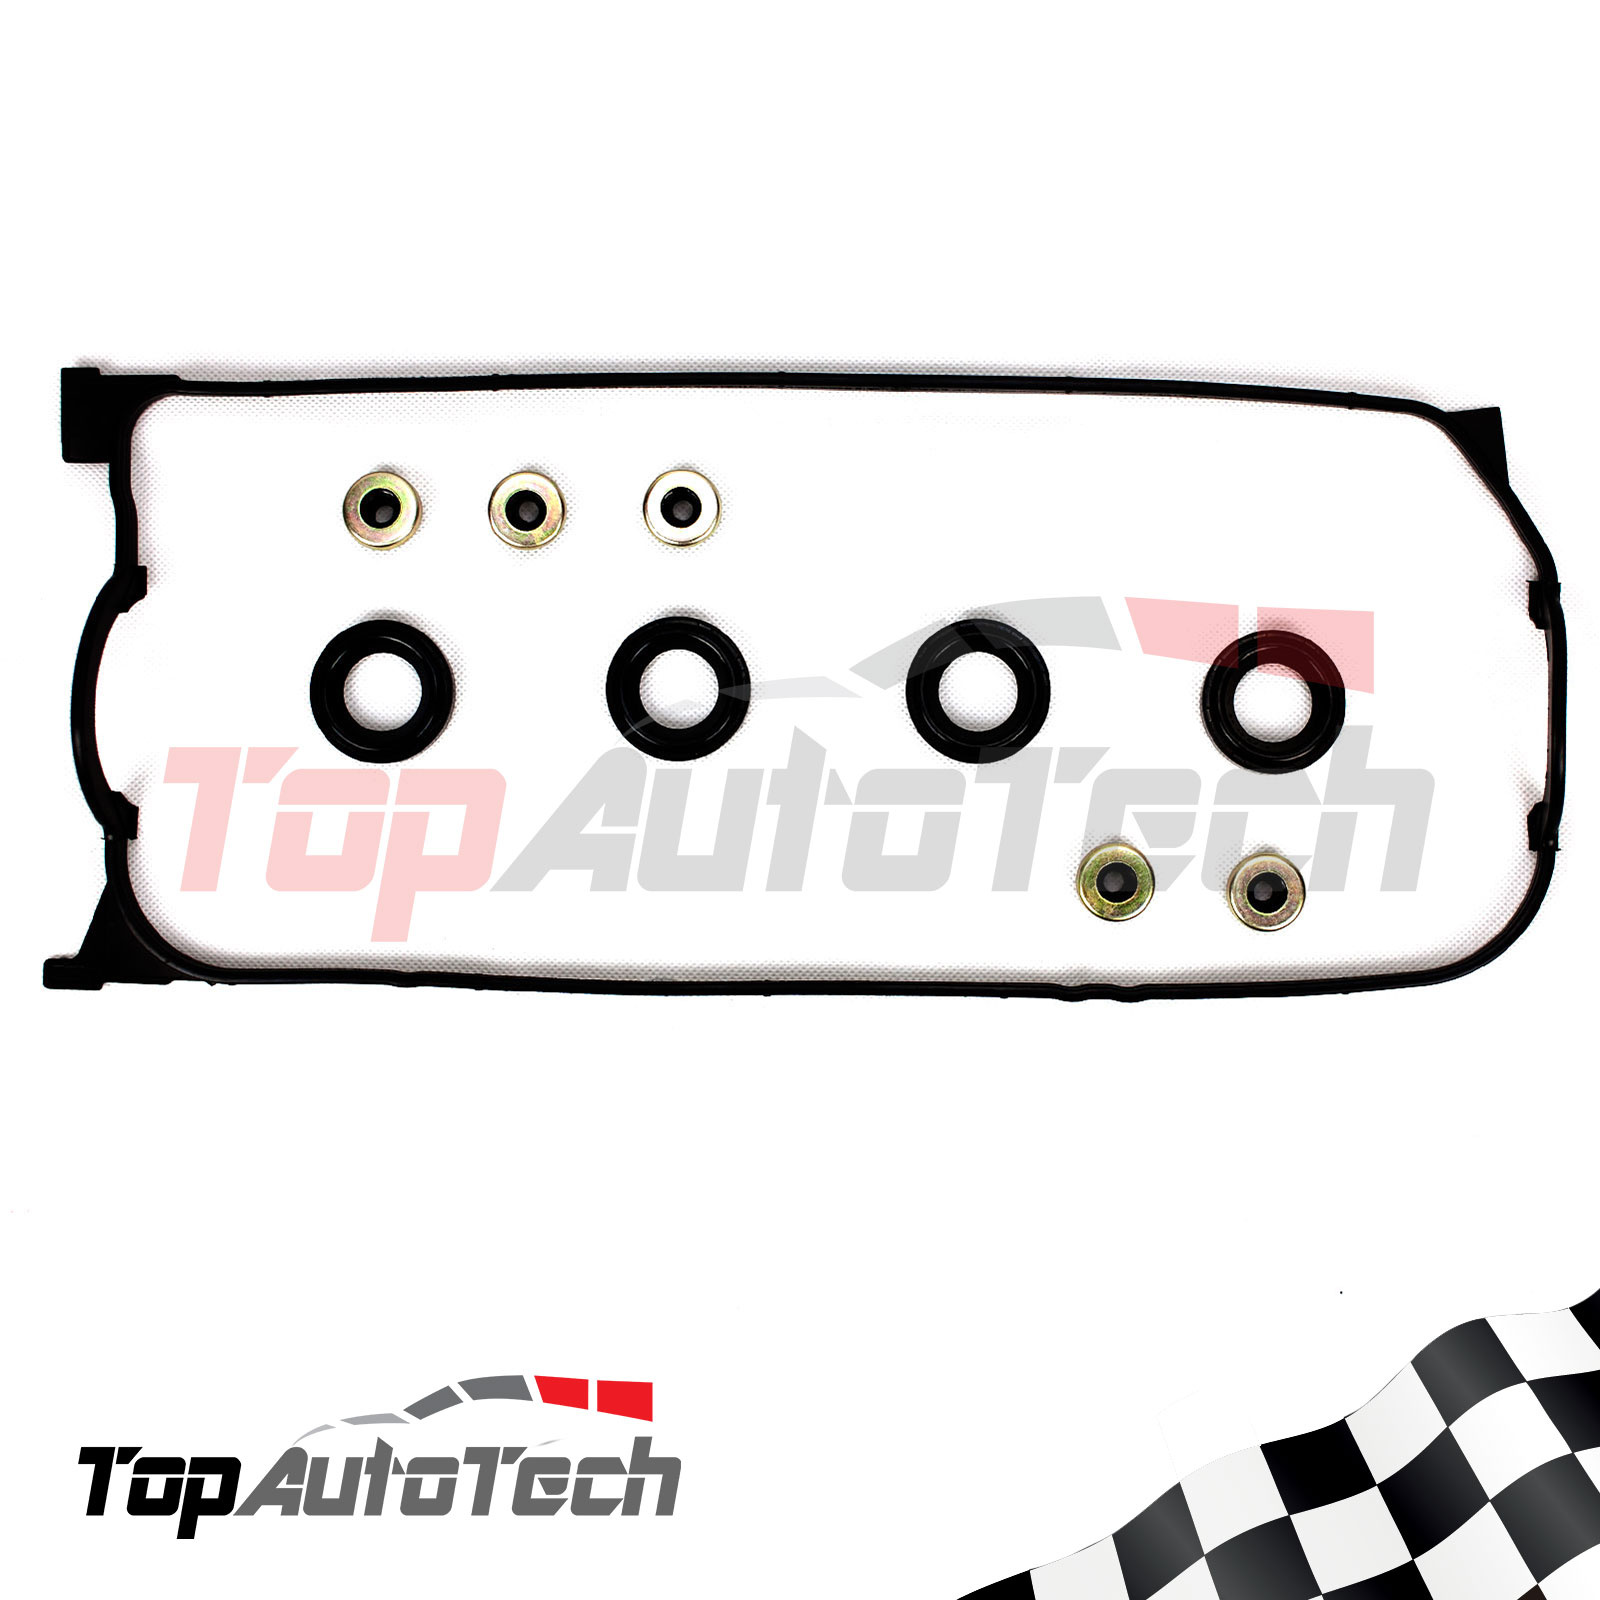 02 civic valve cover gasket